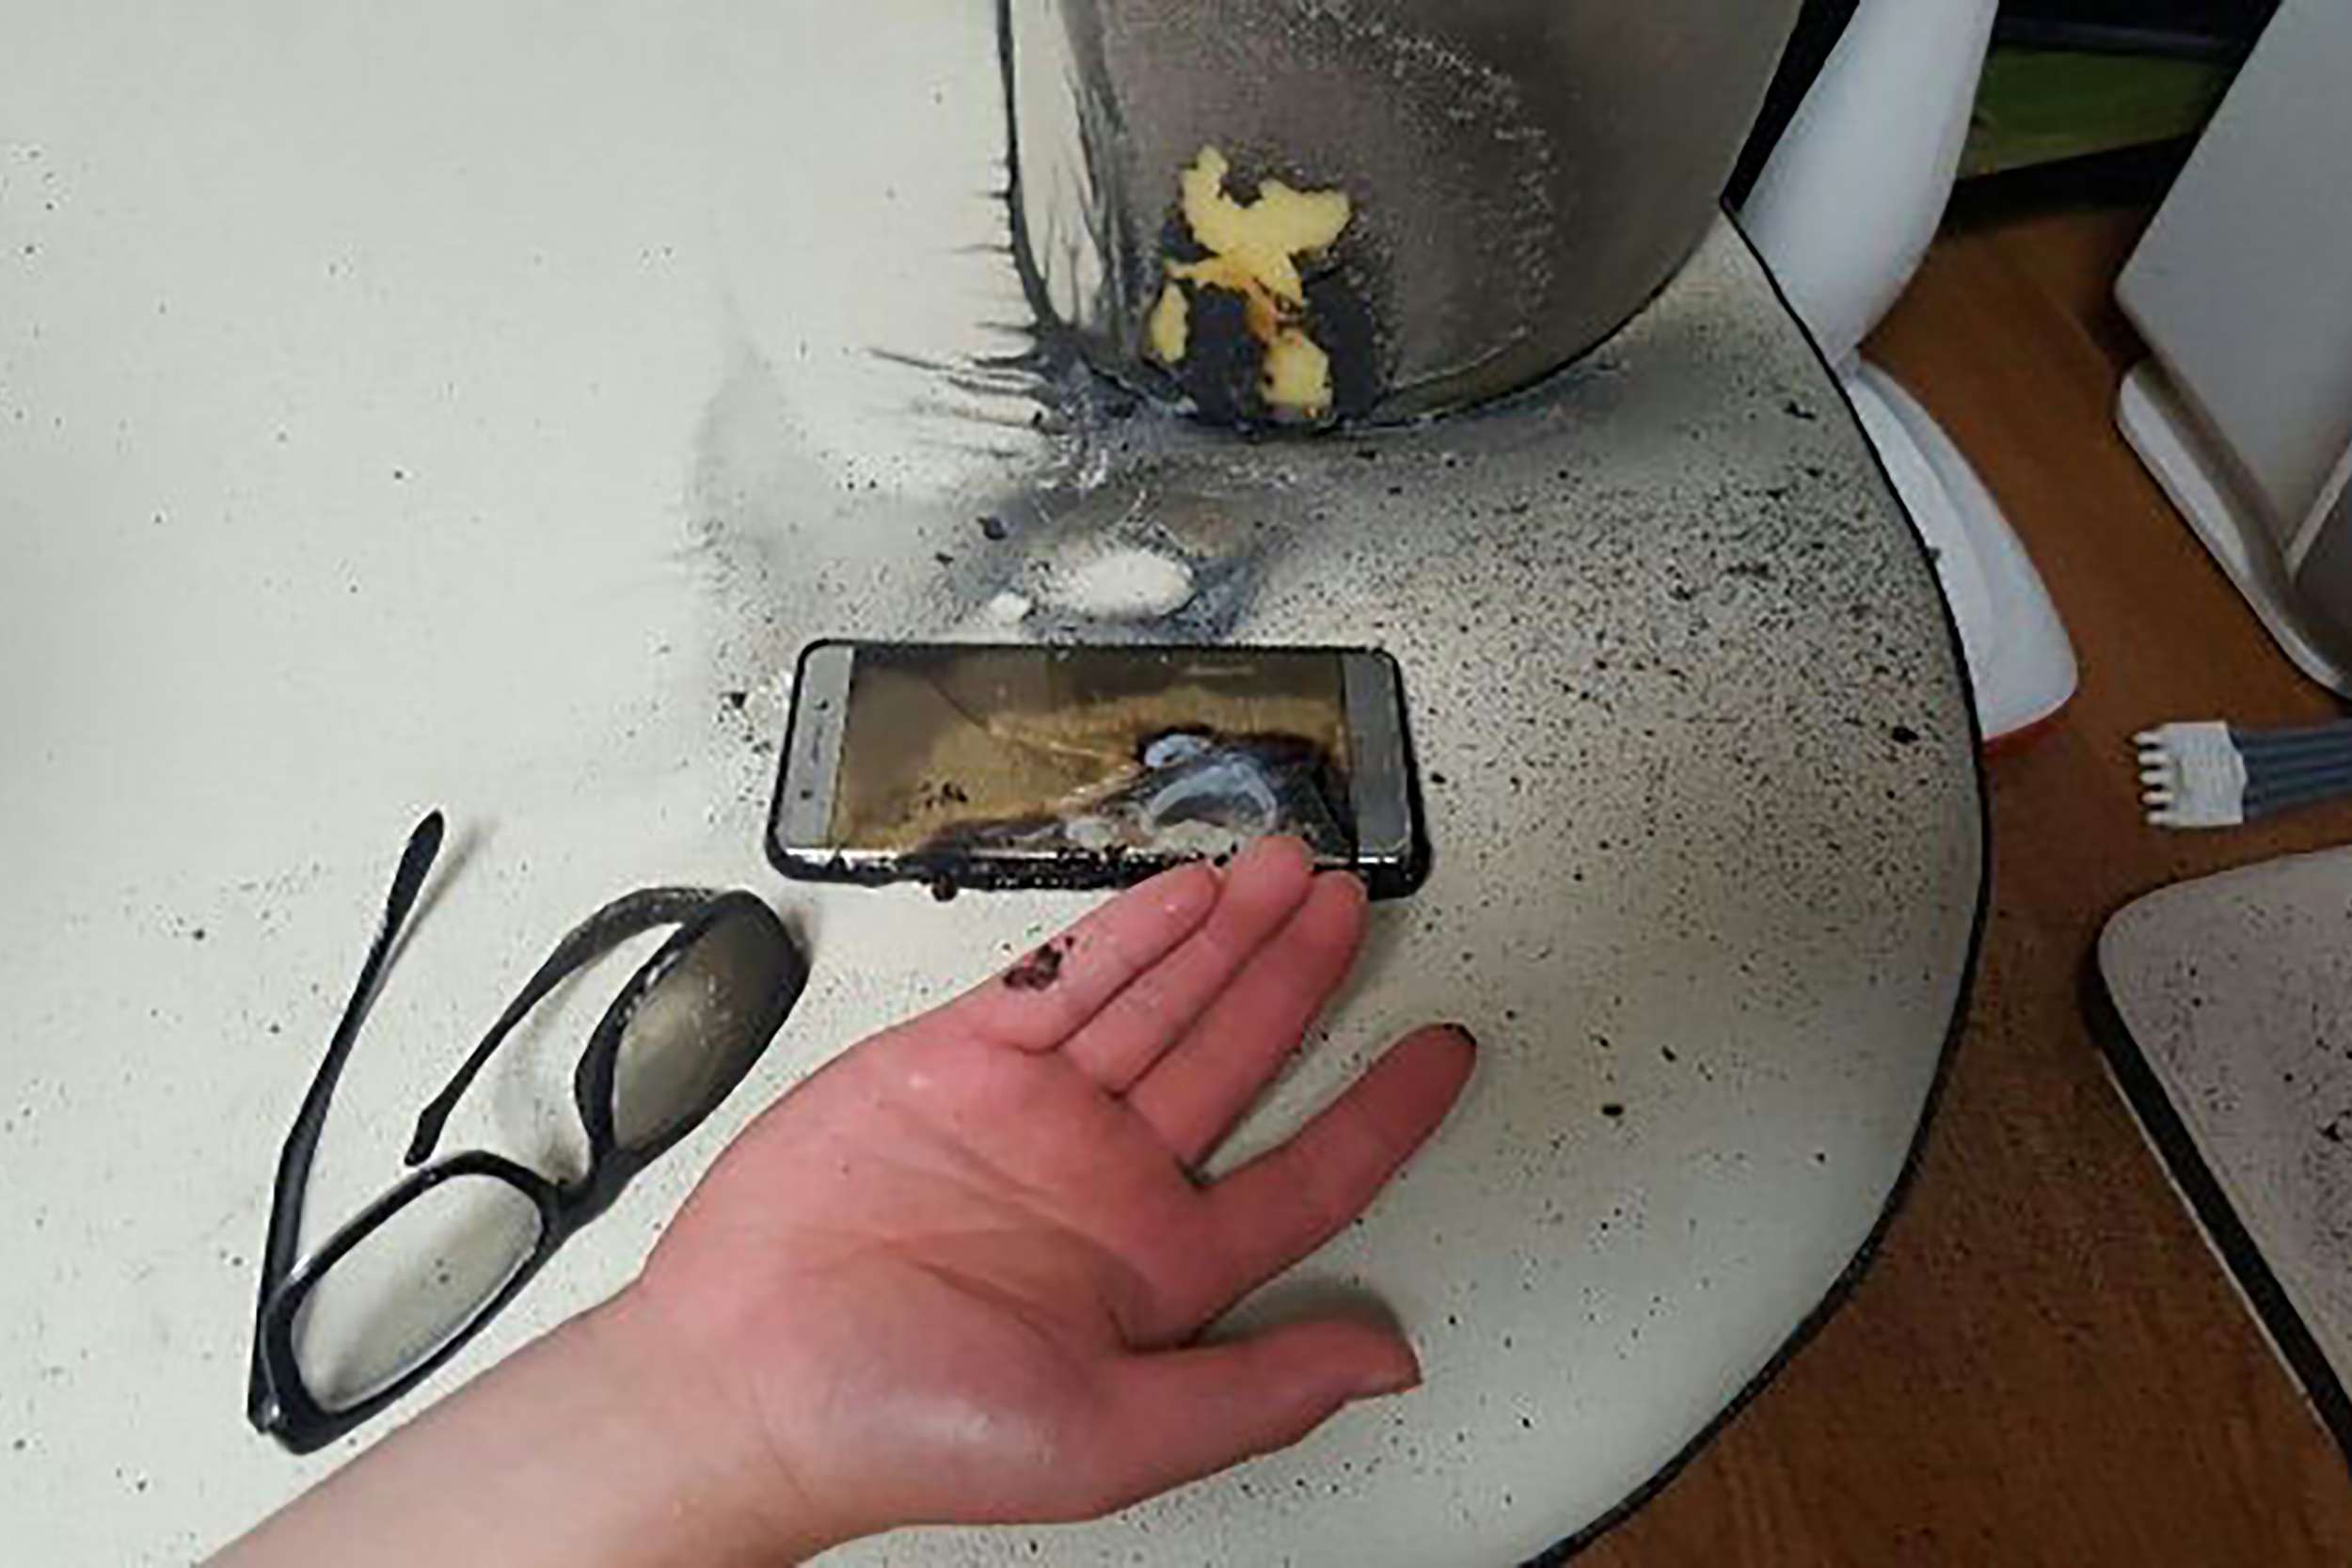 A Samsung Galaxy Note7 smartphone, pictured after its battery exploded. Samsung’s recall of the phones is to cost a reported US$2 billion. Photo: AFP